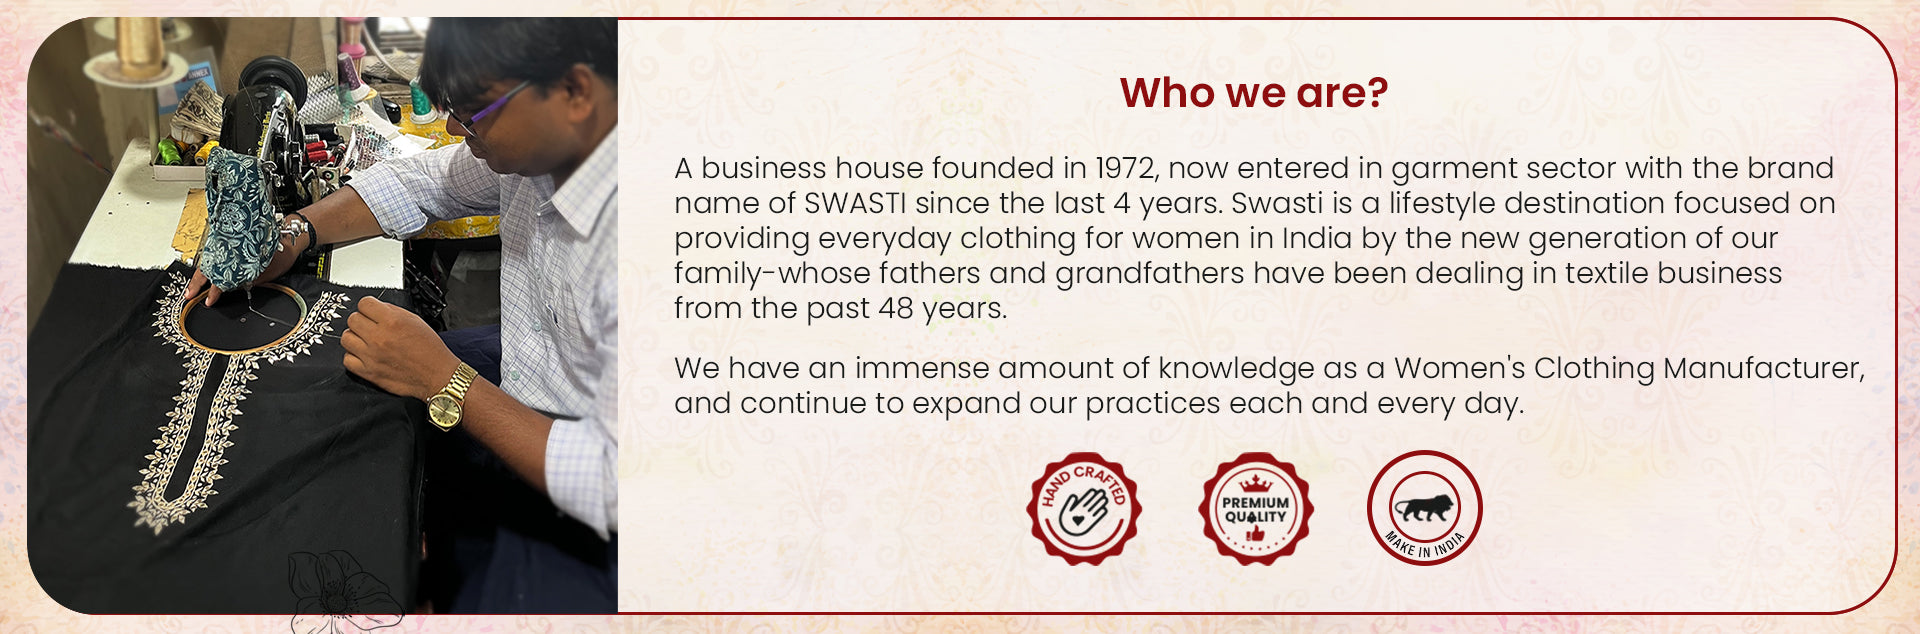 Business cart of Swasti mentioned Who we are?